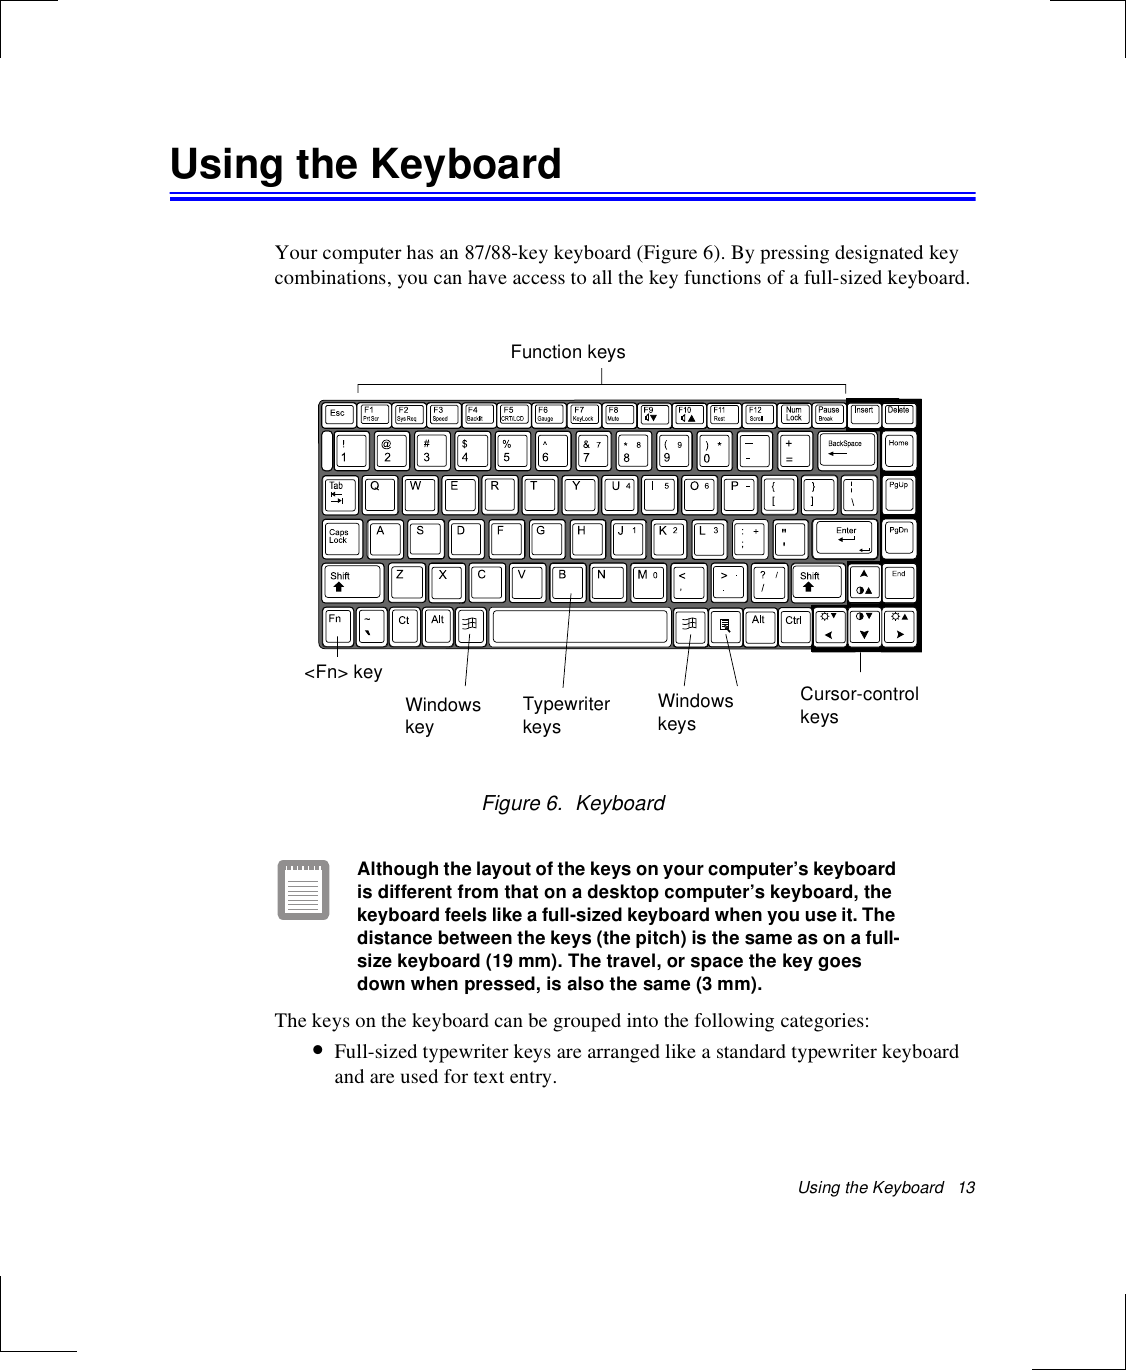 Using the Keyboard   13Using the KeyboardYour computer has an 87/88-key keyboard (Figure 6). By pressing designated key combinations, you can have access to all the key functions of a full-sized keyboard.Figure 6.  KeyboardAlthough the layout of the keys on your computer’s keyboard is different from that on a desktop computer’s keyboard, the keyboard feels like a full-sized keyboard when you use it. The distance between the keys (the pitch) is the same as on a full-size keyboard (19 mm). The travel, or space the key goes down when pressed, is also the same (3 mm).The keys on the keyboard can be grouped into the following categories:•Full-sized typewriter keys are arranged like a standard typewriter keyboard and are used for text entry. Function keysWindows keyCursor-control keysTypewriterkeysWindows keys&lt;Fn&gt; key